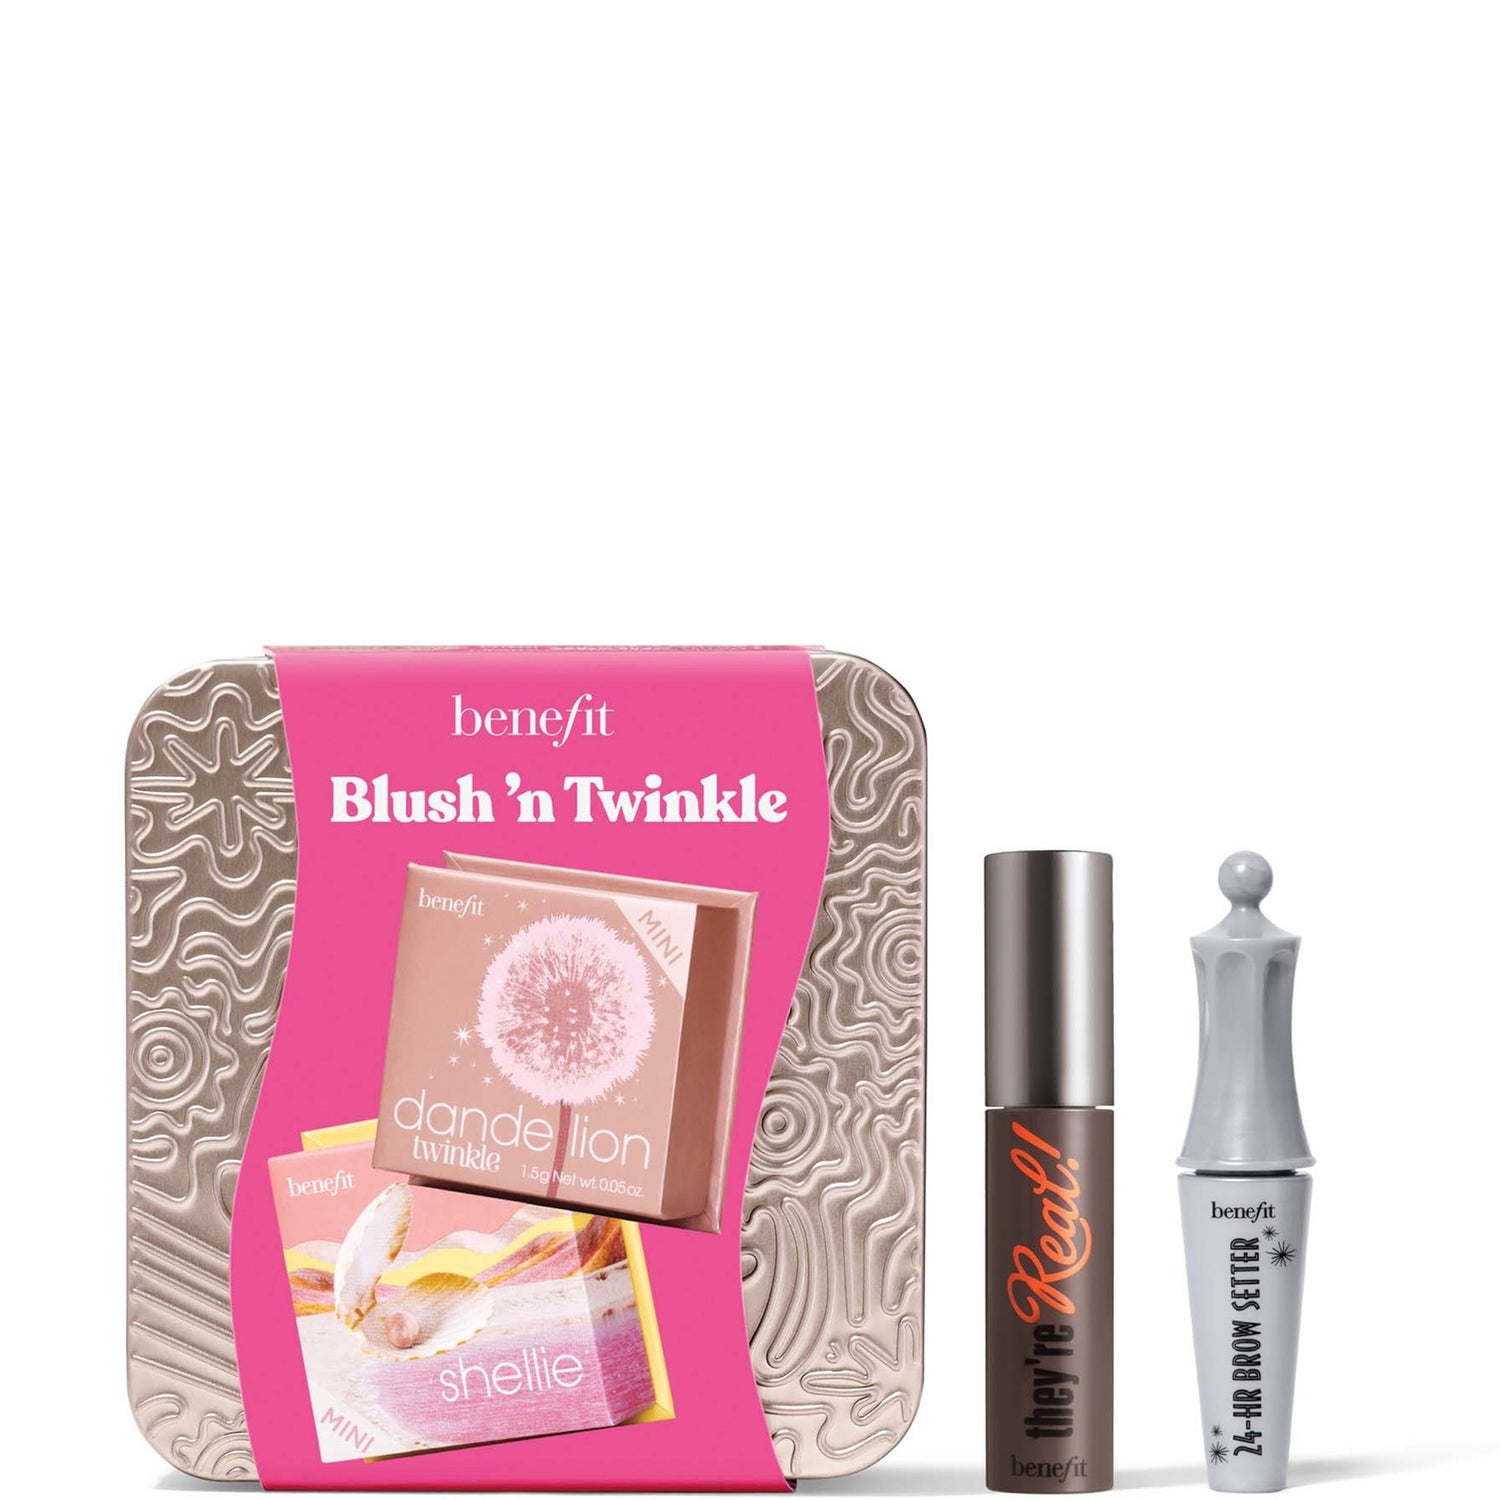 benefit Blush 'n Twinkle Blusher and Highlighter Gift Set